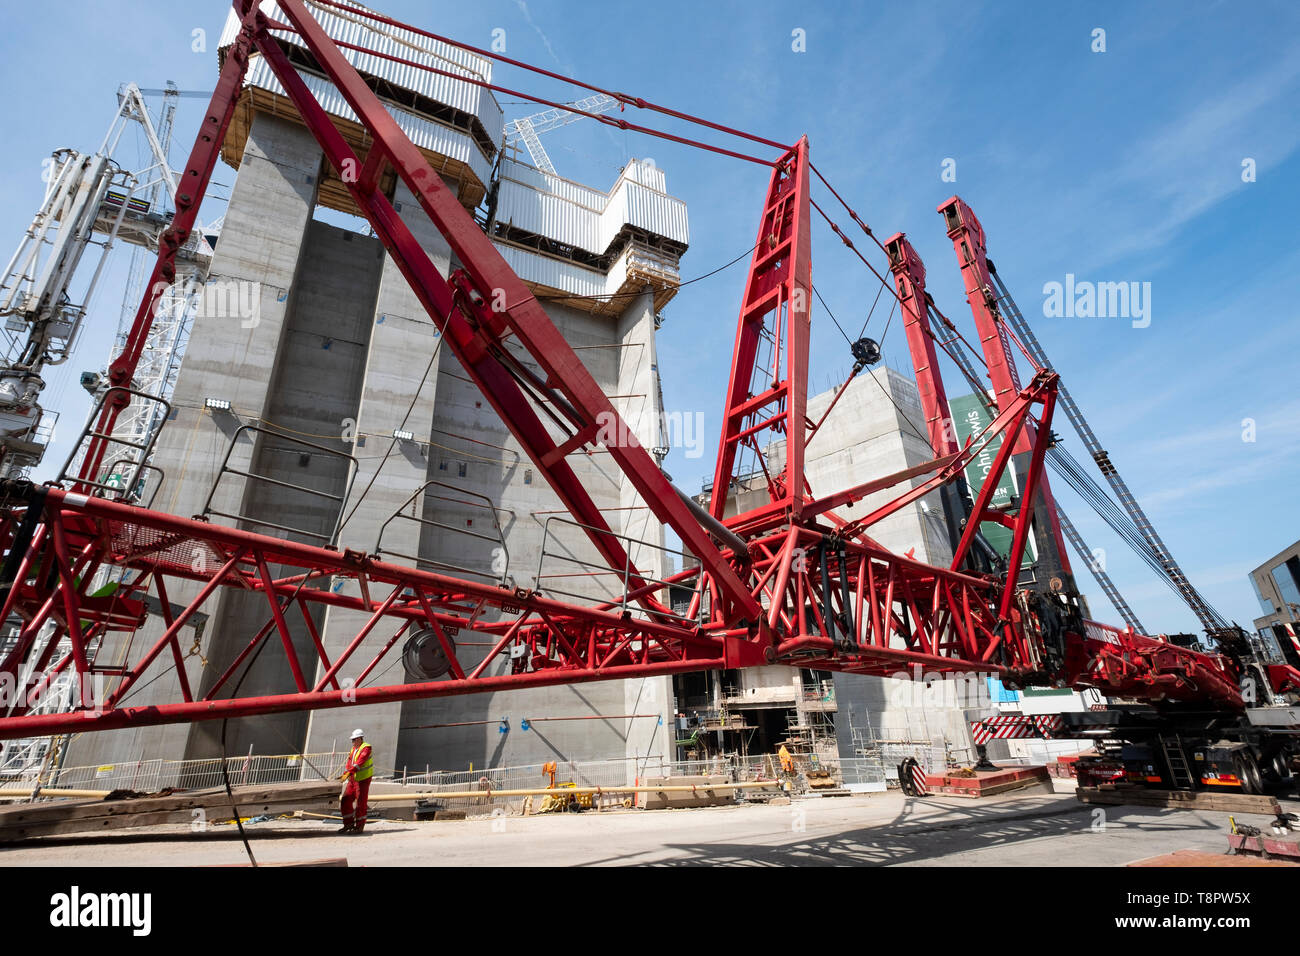 Edinburgh, Scotland, UK. 14 May 2019. Leith Street closed to allow massive mobile crane to be erected. The crane will be used in the construction of the Edinburgh St James development currently ongoing and scheduled to be completed in 2020. Credit: Iain Masterton/Alamy Live News Stock Photo